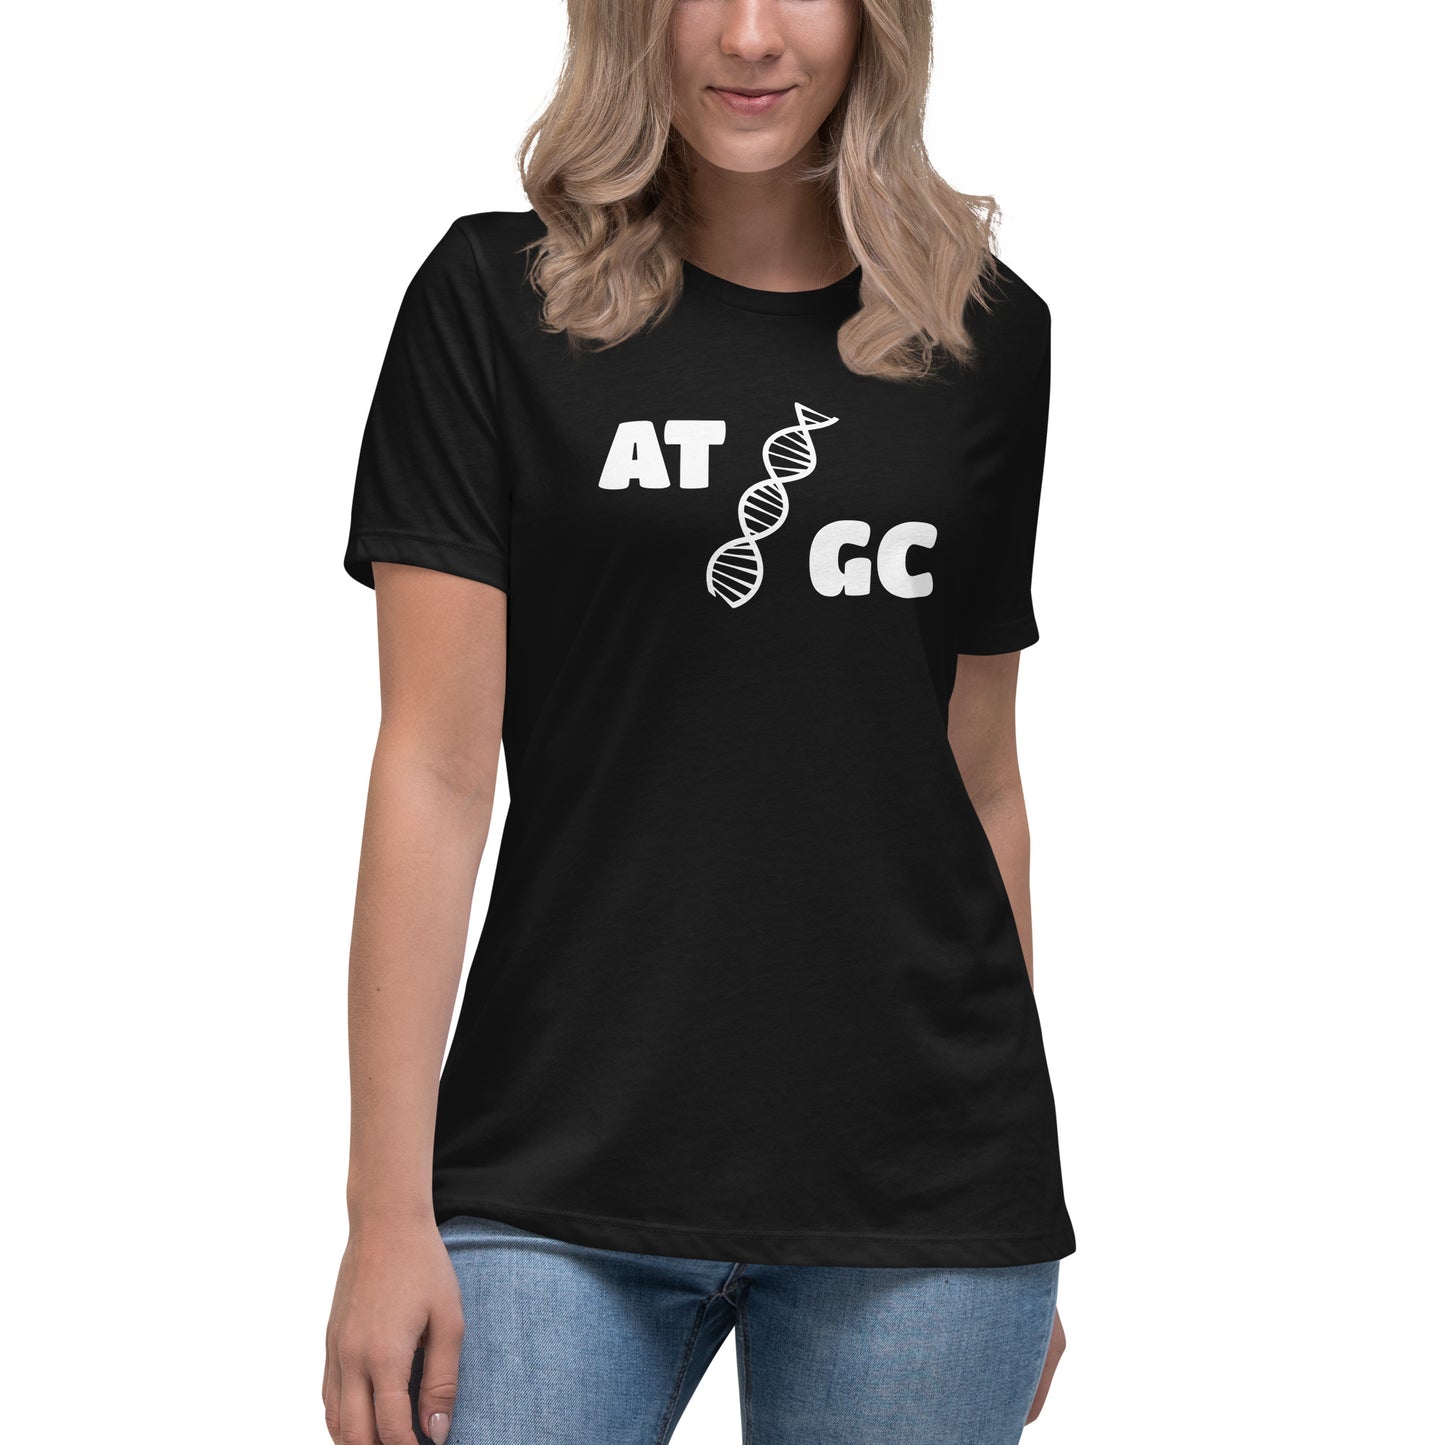 Women with black t-shirt with image of a DNA string and the text "ATGC"